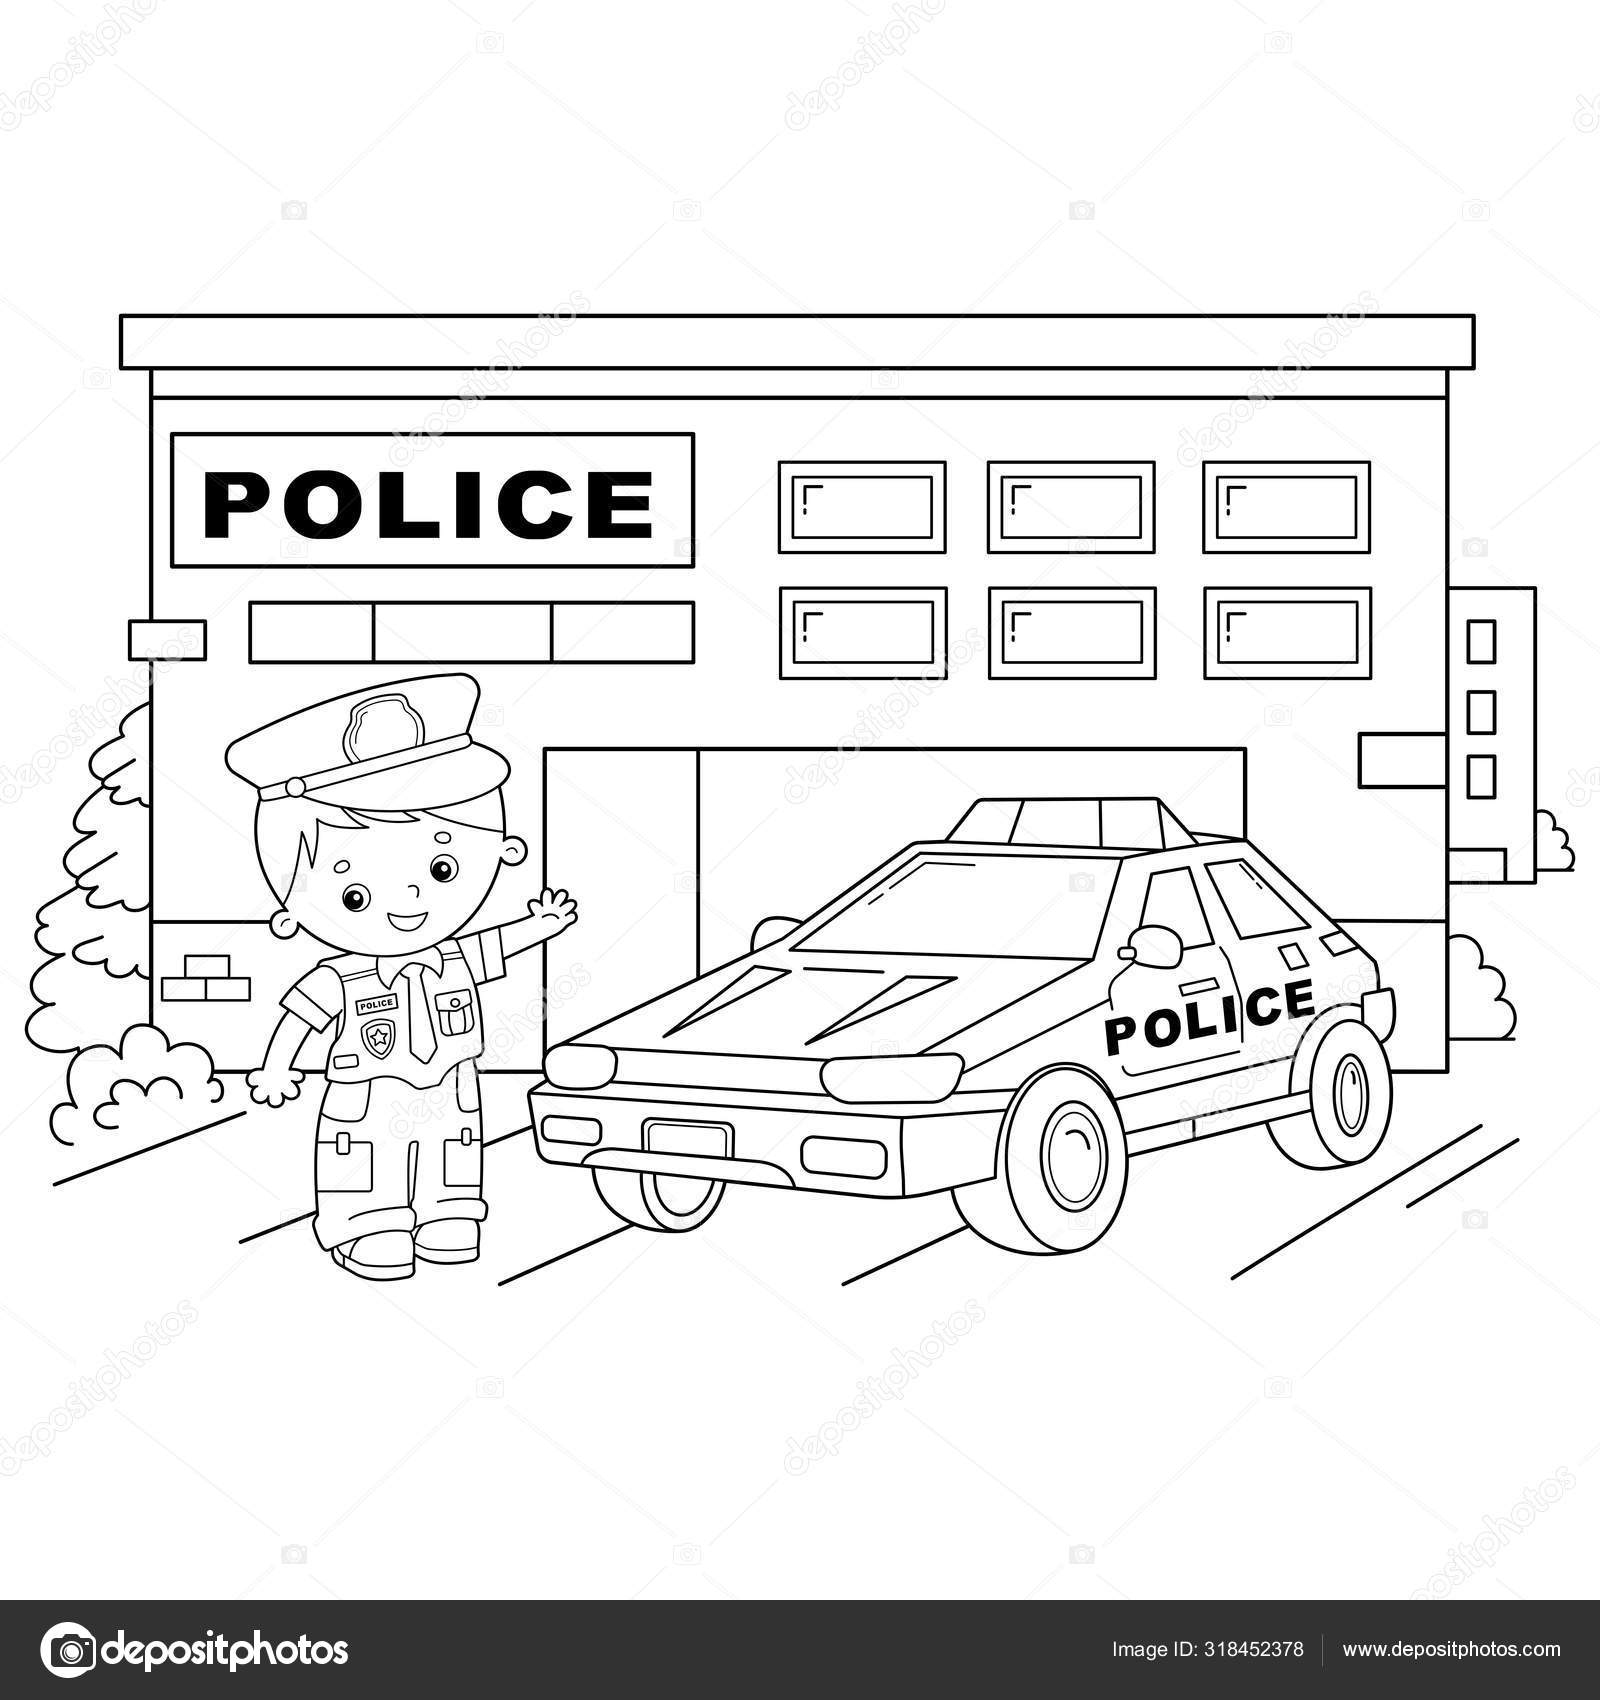 Coloring page outline of cartoon policeman with car profession